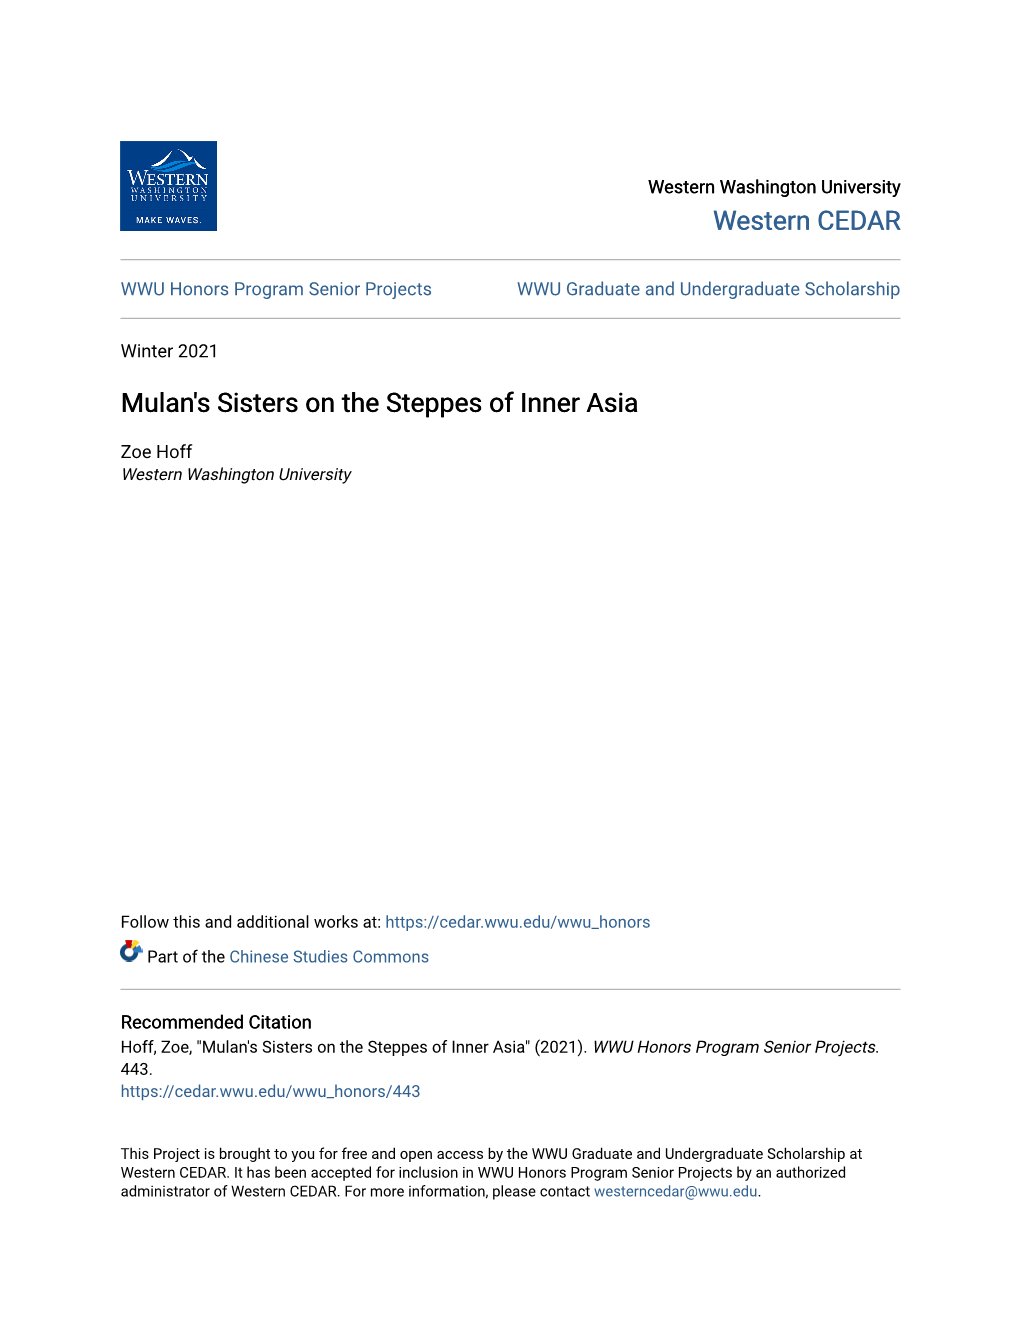 Mulan's Sisters on the Steppes of Inner Asia